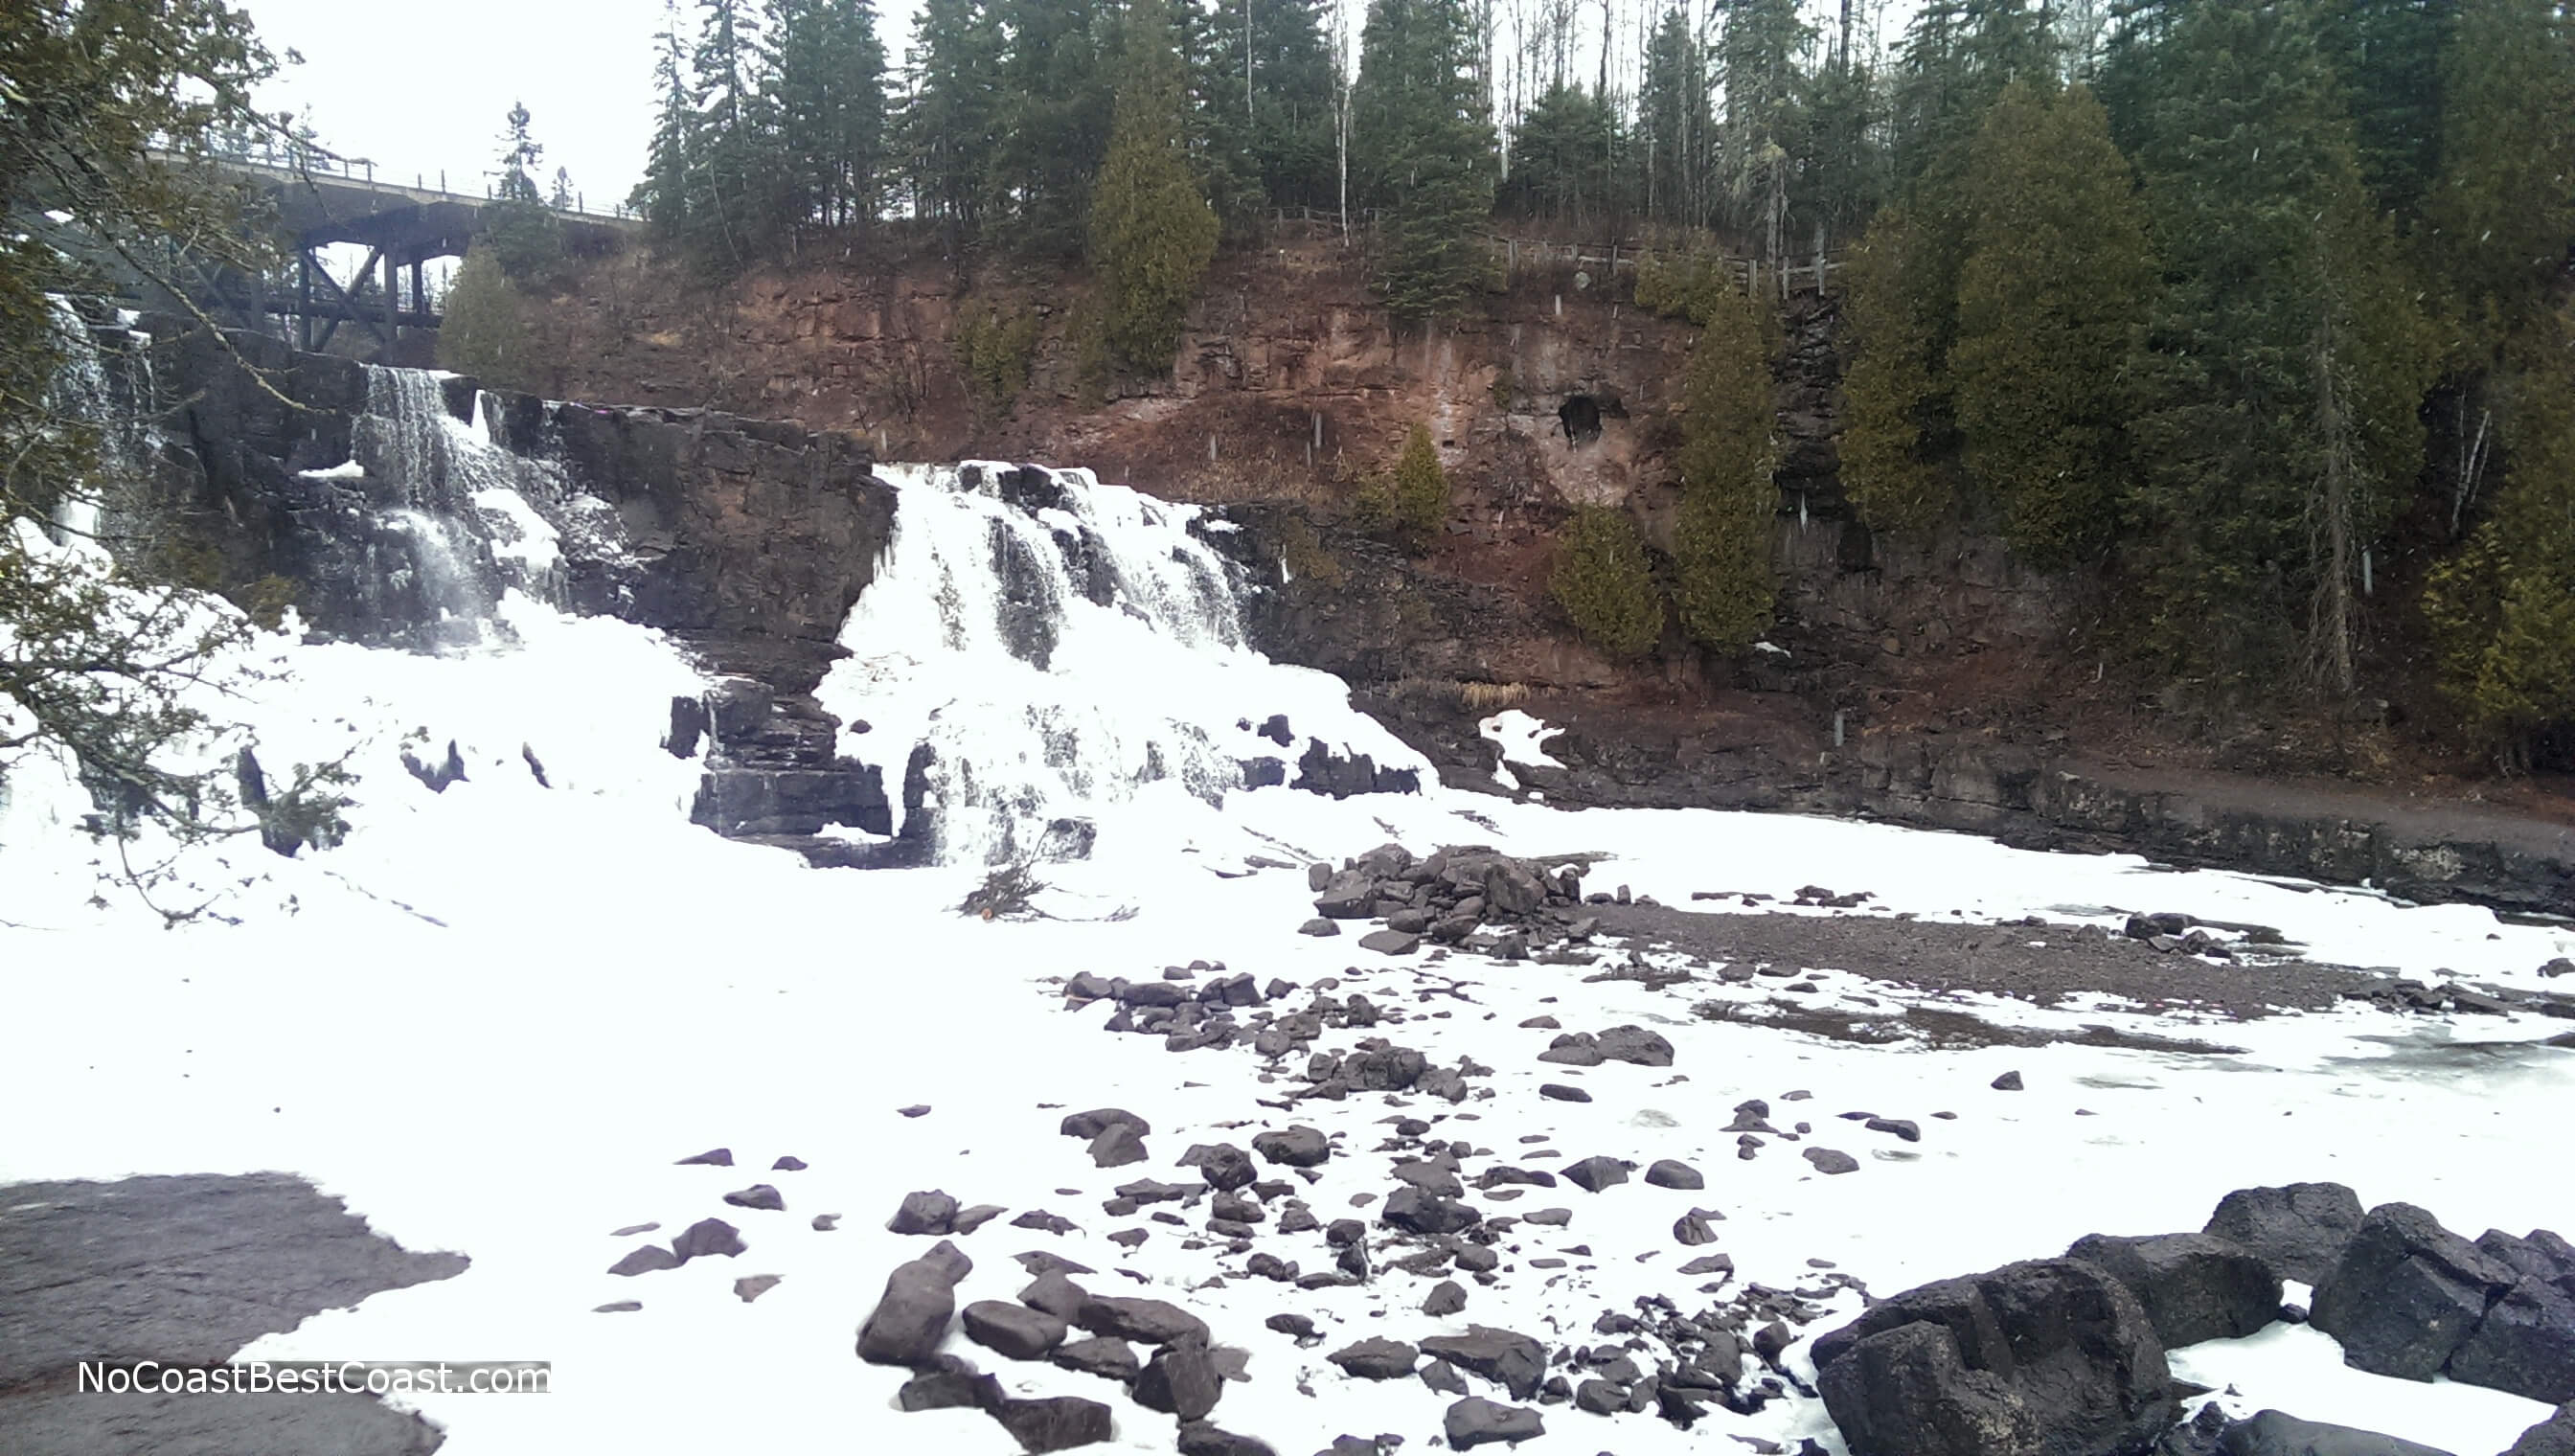 Middle Falls from the viewing area